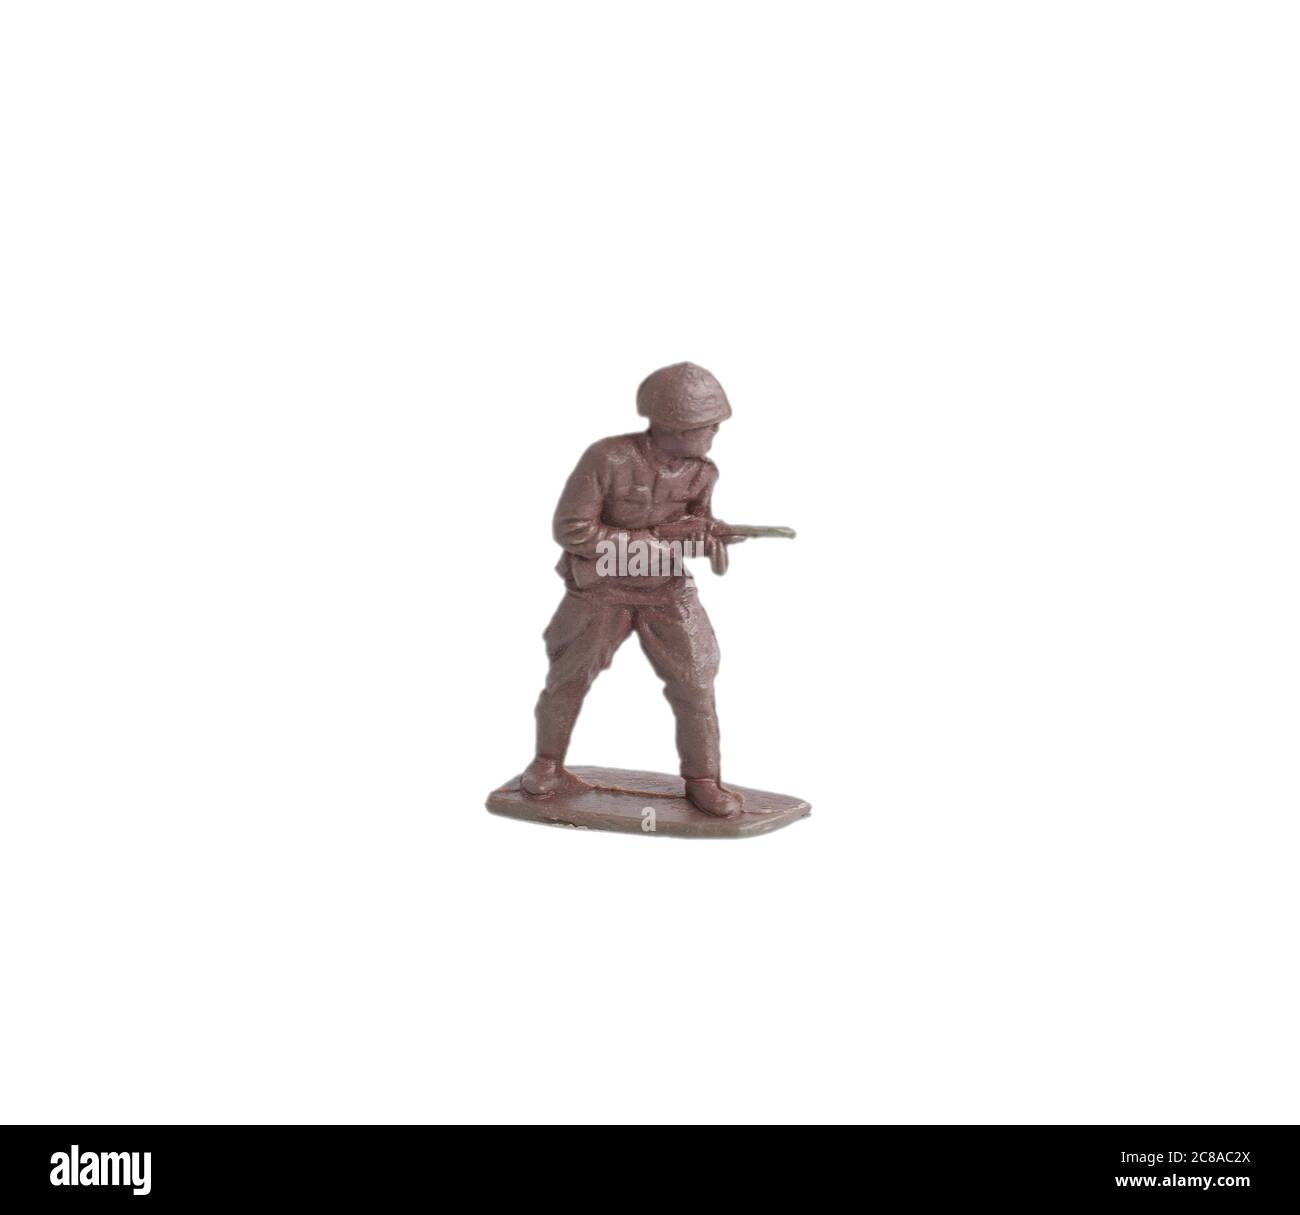 Toy soldiers isolated on white background. Old vintage toy soldiers Stock Photo